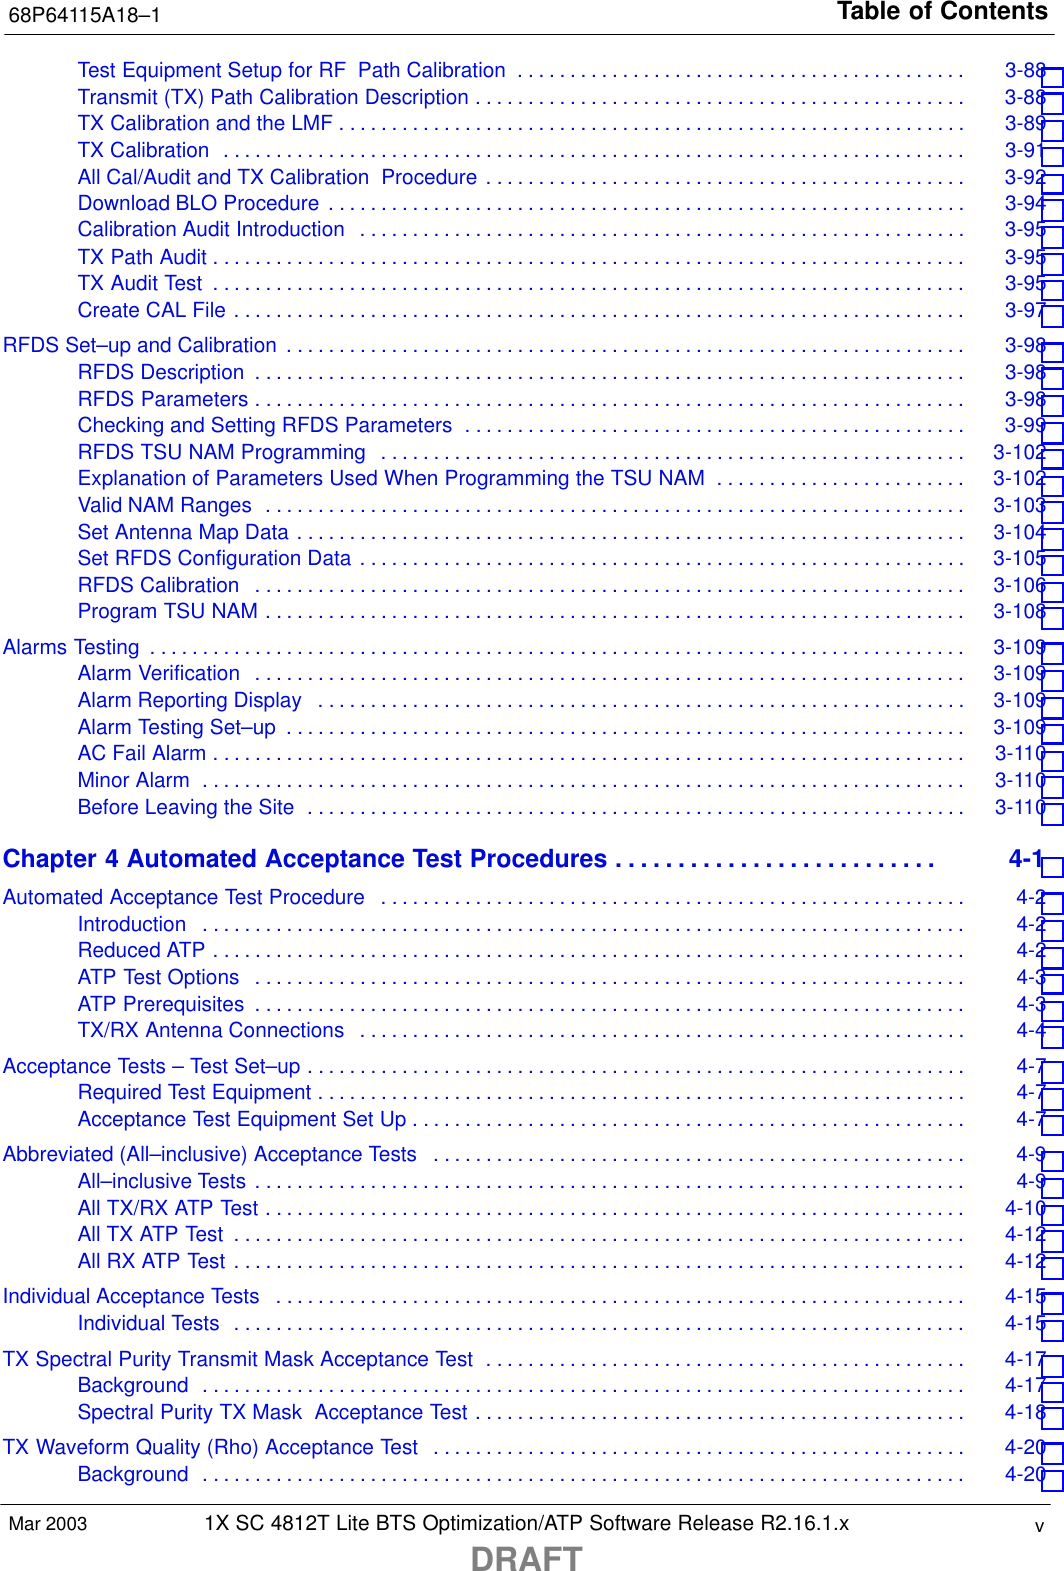 Table of Contents68P64115A18–11X SC 4812T Lite BTS Optimization/ATP Software Release R2.16.1.xDRAFTvMar 2003Test Equipment Setup for RF Path Calibration 3-88 . . . . . . . . . . . . . . . . . . . . . . . . . . . . . . . . . . . . . . . . . . . Transmit (TX) Path Calibration Description 3-88 . . . . . . . . . . . . . . . . . . . . . . . . . . . . . . . . . . . . . . . . . . . . . . . TX Calibration and the LMF 3-89 . . . . . . . . . . . . . . . . . . . . . . . . . . . . . . . . . . . . . . . . . . . . . . . . . . . . . . . . . . . . TX Calibration 3-91 . . . . . . . . . . . . . . . . . . . . . . . . . . . . . . . . . . . . . . . . . . . . . . . . . . . . . . . . . . . . . . . . . . . . . . . All Cal/Audit and TX Calibration  Procedure 3-92 . . . . . . . . . . . . . . . . . . . . . . . . . . . . . . . . . . . . . . . . . . . . . . Download BLO Procedure 3-94 . . . . . . . . . . . . . . . . . . . . . . . . . . . . . . . . . . . . . . . . . . . . . . . . . . . . . . . . . . . . . Calibration Audit Introduction 3-95 . . . . . . . . . . . . . . . . . . . . . . . . . . . . . . . . . . . . . . . . . . . . . . . . . . . . . . . . . . TX Path Audit 3-95 . . . . . . . . . . . . . . . . . . . . . . . . . . . . . . . . . . . . . . . . . . . . . . . . . . . . . . . . . . . . . . . . . . . . . . . . TX Audit Test 3-95 . . . . . . . . . . . . . . . . . . . . . . . . . . . . . . . . . . . . . . . . . . . . . . . . . . . . . . . . . . . . . . . . . . . . . . . . Create CAL File 3-97 . . . . . . . . . . . . . . . . . . . . . . . . . . . . . . . . . . . . . . . . . . . . . . . . . . . . . . . . . . . . . . . . . . . . . . RFDS Set–up and Calibration 3-98 . . . . . . . . . . . . . . . . . . . . . . . . . . . . . . . . . . . . . . . . . . . . . . . . . . . . . . . . . . . . . . . . . RFDS Description 3-98 . . . . . . . . . . . . . . . . . . . . . . . . . . . . . . . . . . . . . . . . . . . . . . . . . . . . . . . . . . . . . . . . . . . . RFDS Parameters 3-98 . . . . . . . . . . . . . . . . . . . . . . . . . . . . . . . . . . . . . . . . . . . . . . . . . . . . . . . . . . . . . . . . . . . . Checking and Setting RFDS Parameters 3-99 . . . . . . . . . . . . . . . . . . . . . . . . . . . . . . . . . . . . . . . . . . . . . . . . RFDS TSU NAM Programming 3-102 . . . . . . . . . . . . . . . . . . . . . . . . . . . . . . . . . . . . . . . . . . . . . . . . . . . . . . . . Explanation of Parameters Used When Programming the TSU NAM 3-102 . . . . . . . . . . . . . . . . . . . . . . . . Valid NAM Ranges 3-103 . . . . . . . . . . . . . . . . . . . . . . . . . . . . . . . . . . . . . . . . . . . . . . . . . . . . . . . . . . . . . . . . . . . Set Antenna Map Data 3-104 . . . . . . . . . . . . . . . . . . . . . . . . . . . . . . . . . . . . . . . . . . . . . . . . . . . . . . . . . . . . . . . . Set RFDS Configuration Data 3-105 . . . . . . . . . . . . . . . . . . . . . . . . . . . . . . . . . . . . . . . . . . . . . . . . . . . . . . . . . . RFDS Calibration 3-106 . . . . . . . . . . . . . . . . . . . . . . . . . . . . . . . . . . . . . . . . . . . . . . . . . . . . . . . . . . . . . . . . . . . . Program TSU NAM 3-108 . . . . . . . . . . . . . . . . . . . . . . . . . . . . . . . . . . . . . . . . . . . . . . . . . . . . . . . . . . . . . . . . . . . Alarms Testing 3-109 . . . . . . . . . . . . . . . . . . . . . . . . . . . . . . . . . . . . . . . . . . . . . . . . . . . . . . . . . . . . . . . . . . . . . . . . . . . . . . Alarm Verification 3-109 . . . . . . . . . . . . . . . . . . . . . . . . . . . . . . . . . . . . . . . . . . . . . . . . . . . . . . . . . . . . . . . . . . . . Alarm Reporting Display 3-109 . . . . . . . . . . . . . . . . . . . . . . . . . . . . . . . . . . . . . . . . . . . . . . . . . . . . . . . . . . . . . . Alarm Testing Set–up 3-109 . . . . . . . . . . . . . . . . . . . . . . . . . . . . . . . . . . . . . . . . . . . . . . . . . . . . . . . . . . . . . . . . . AC Fail Alarm 3-110 . . . . . . . . . . . . . . . . . . . . . . . . . . . . . . . . . . . . . . . . . . . . . . . . . . . . . . . . . . . . . . . . . . . . . . . . Minor Alarm 3-110 . . . . . . . . . . . . . . . . . . . . . . . . . . . . . . . . . . . . . . . . . . . . . . . . . . . . . . . . . . . . . . . . . . . . . . . . . Before Leaving the Site 3-110 . . . . . . . . . . . . . . . . . . . . . . . . . . . . . . . . . . . . . . . . . . . . . . . . . . . . . . . . . . . . . . . Chapter 4 Automated Acceptance Test Procedures 4-1 . . . . . . . . . . . . . . . . . . . . . . . . . . Automated Acceptance Test Procedure 4-2 . . . . . . . . . . . . . . . . . . . . . . . . . . . . . . . . . . . . . . . . . . . . . . . . . . . . . . . . Introduction 4-2 . . . . . . . . . . . . . . . . . . . . . . . . . . . . . . . . . . . . . . . . . . . . . . . . . . . . . . . . . . . . . . . . . . . . . . . . . Reduced ATP 4-2 . . . . . . . . . . . . . . . . . . . . . . . . . . . . . . . . . . . . . . . . . . . . . . . . . . . . . . . . . . . . . . . . . . . . . . . . ATP Test Options 4-3 . . . . . . . . . . . . . . . . . . . . . . . . . . . . . . . . . . . . . . . . . . . . . . . . . . . . . . . . . . . . . . . . . . . . ATP Prerequisites 4-3 . . . . . . . . . . . . . . . . . . . . . . . . . . . . . . . . . . . . . . . . . . . . . . . . . . . . . . . . . . . . . . . . . . . . TX/RX Antenna Connections 4-4 . . . . . . . . . . . . . . . . . . . . . . . . . . . . . . . . . . . . . . . . . . . . . . . . . . . . . . . . . . Acceptance Tests – Test Set–up 4-7 . . . . . . . . . . . . . . . . . . . . . . . . . . . . . . . . . . . . . . . . . . . . . . . . . . . . . . . . . . . . . . . Required Test Equipment 4-7 . . . . . . . . . . . . . . . . . . . . . . . . . . . . . . . . . . . . . . . . . . . . . . . . . . . . . . . . . . . . . . Acceptance Test Equipment Set Up 4-7 . . . . . . . . . . . . . . . . . . . . . . . . . . . . . . . . . . . . . . . . . . . . . . . . . . . . . Abbreviated (All–inclusive) Acceptance Tests 4-9 . . . . . . . . . . . . . . . . . . . . . . . . . . . . . . . . . . . . . . . . . . . . . . . . . . . All–inclusive Tests 4-9 . . . . . . . . . . . . . . . . . . . . . . . . . . . . . . . . . . . . . . . . . . . . . . . . . . . . . . . . . . . . . . . . . . . . All TX/RX ATP Test 4-10 . . . . . . . . . . . . . . . . . . . . . . . . . . . . . . . . . . . . . . . . . . . . . . . . . . . . . . . . . . . . . . . . . . . All TX ATP Test 4-12 . . . . . . . . . . . . . . . . . . . . . . . . . . . . . . . . . . . . . . . . . . . . . . . . . . . . . . . . . . . . . . . . . . . . . . All RX ATP Test 4-12 . . . . . . . . . . . . . . . . . . . . . . . . . . . . . . . . . . . . . . . . . . . . . . . . . . . . . . . . . . . . . . . . . . . . . . Individual Acceptance Tests 4-15 . . . . . . . . . . . . . . . . . . . . . . . . . . . . . . . . . . . . . . . . . . . . . . . . . . . . . . . . . . . . . . . . . . Individual Tests 4-15 . . . . . . . . . . . . . . . . . . . . . . . . . . . . . . . . . . . . . . . . . . . . . . . . . . . . . . . . . . . . . . . . . . . . . . TX Spectral Purity Transmit Mask Acceptance Test 4-17 . . . . . . . . . . . . . . . . . . . . . . . . . . . . . . . . . . . . . . . . . . . . . . Background 4-17 . . . . . . . . . . . . . . . . . . . . . . . . . . . . . . . . . . . . . . . . . . . . . . . . . . . . . . . . . . . . . . . . . . . . . . . . . Spectral Purity TX Mask  Acceptance Test 4-18 . . . . . . . . . . . . . . . . . . . . . . . . . . . . . . . . . . . . . . . . . . . . . . . TX Waveform Quality (Rho) Acceptance Test 4-20 . . . . . . . . . . . . . . . . . . . . . . . . . . . . . . . . . . . . . . . . . . . . . . . . . . . Background 4-20 . . . . . . . . . . . . . . . . . . . . . . . . . . . . . . . . . . . . . . . . . . . . . . . . . . . . . . . . . . . . . . . . . . . . . . . . . 